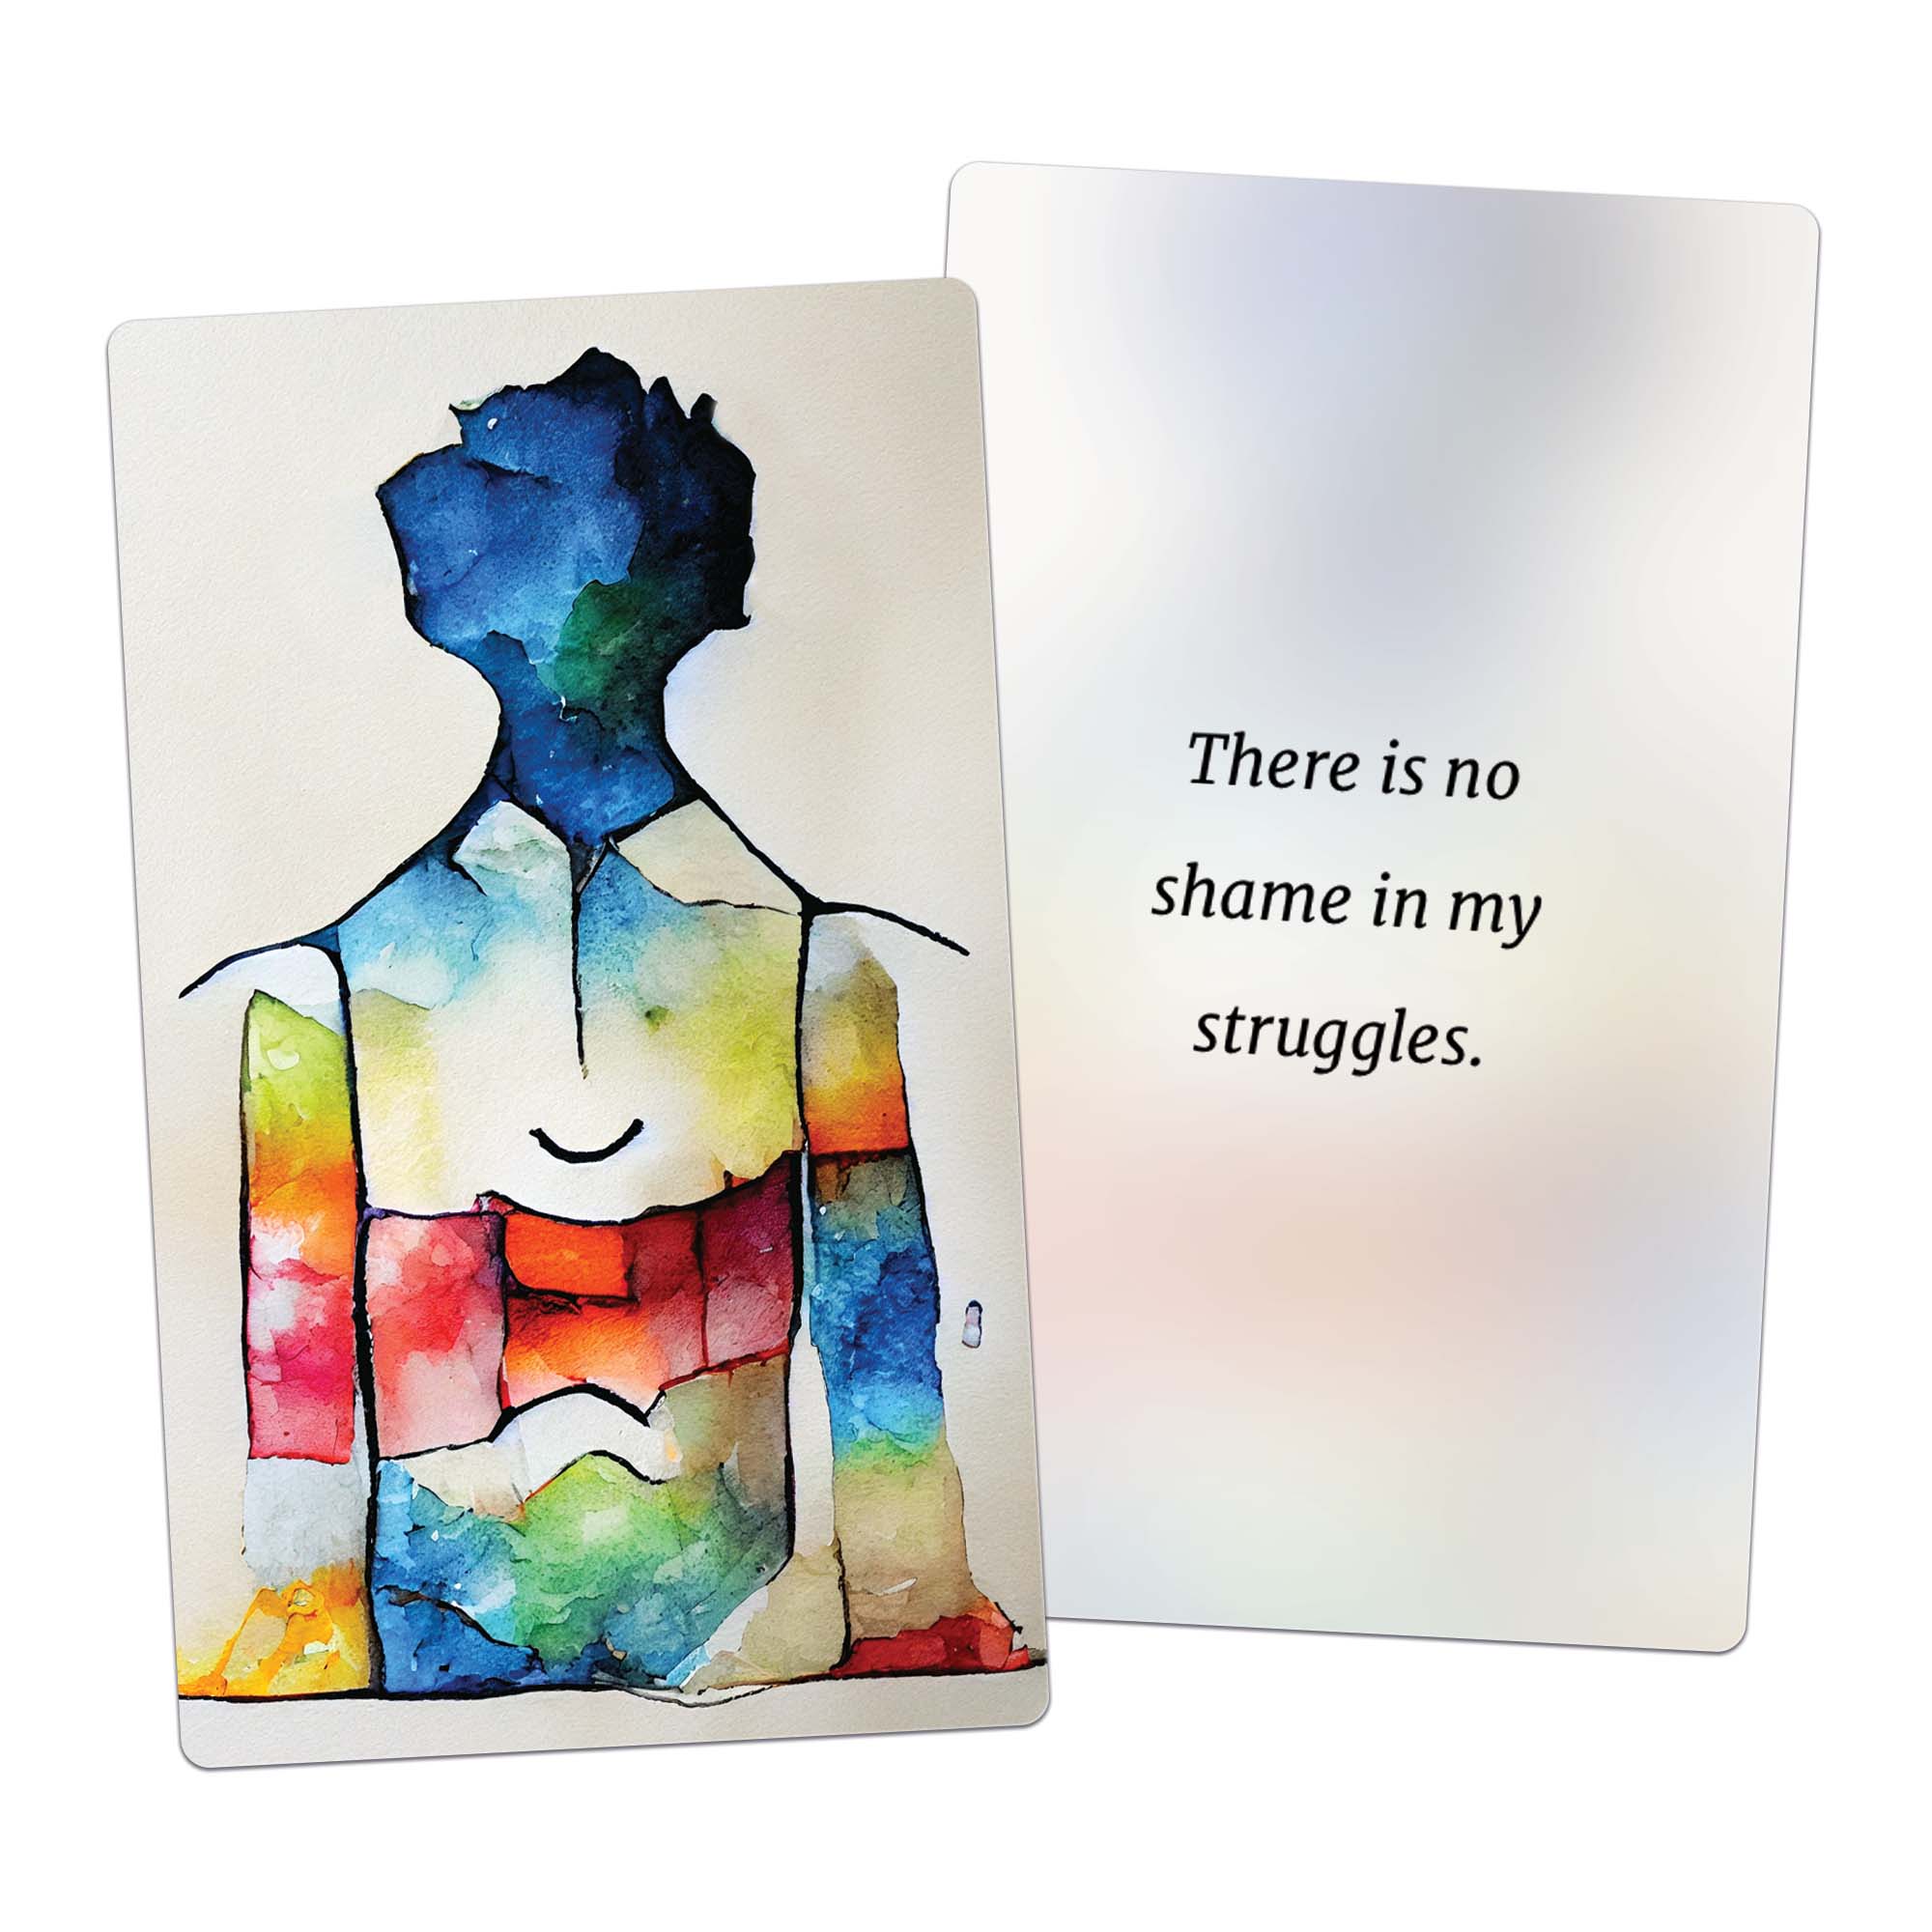 There is no shame in my struggles affirmation card